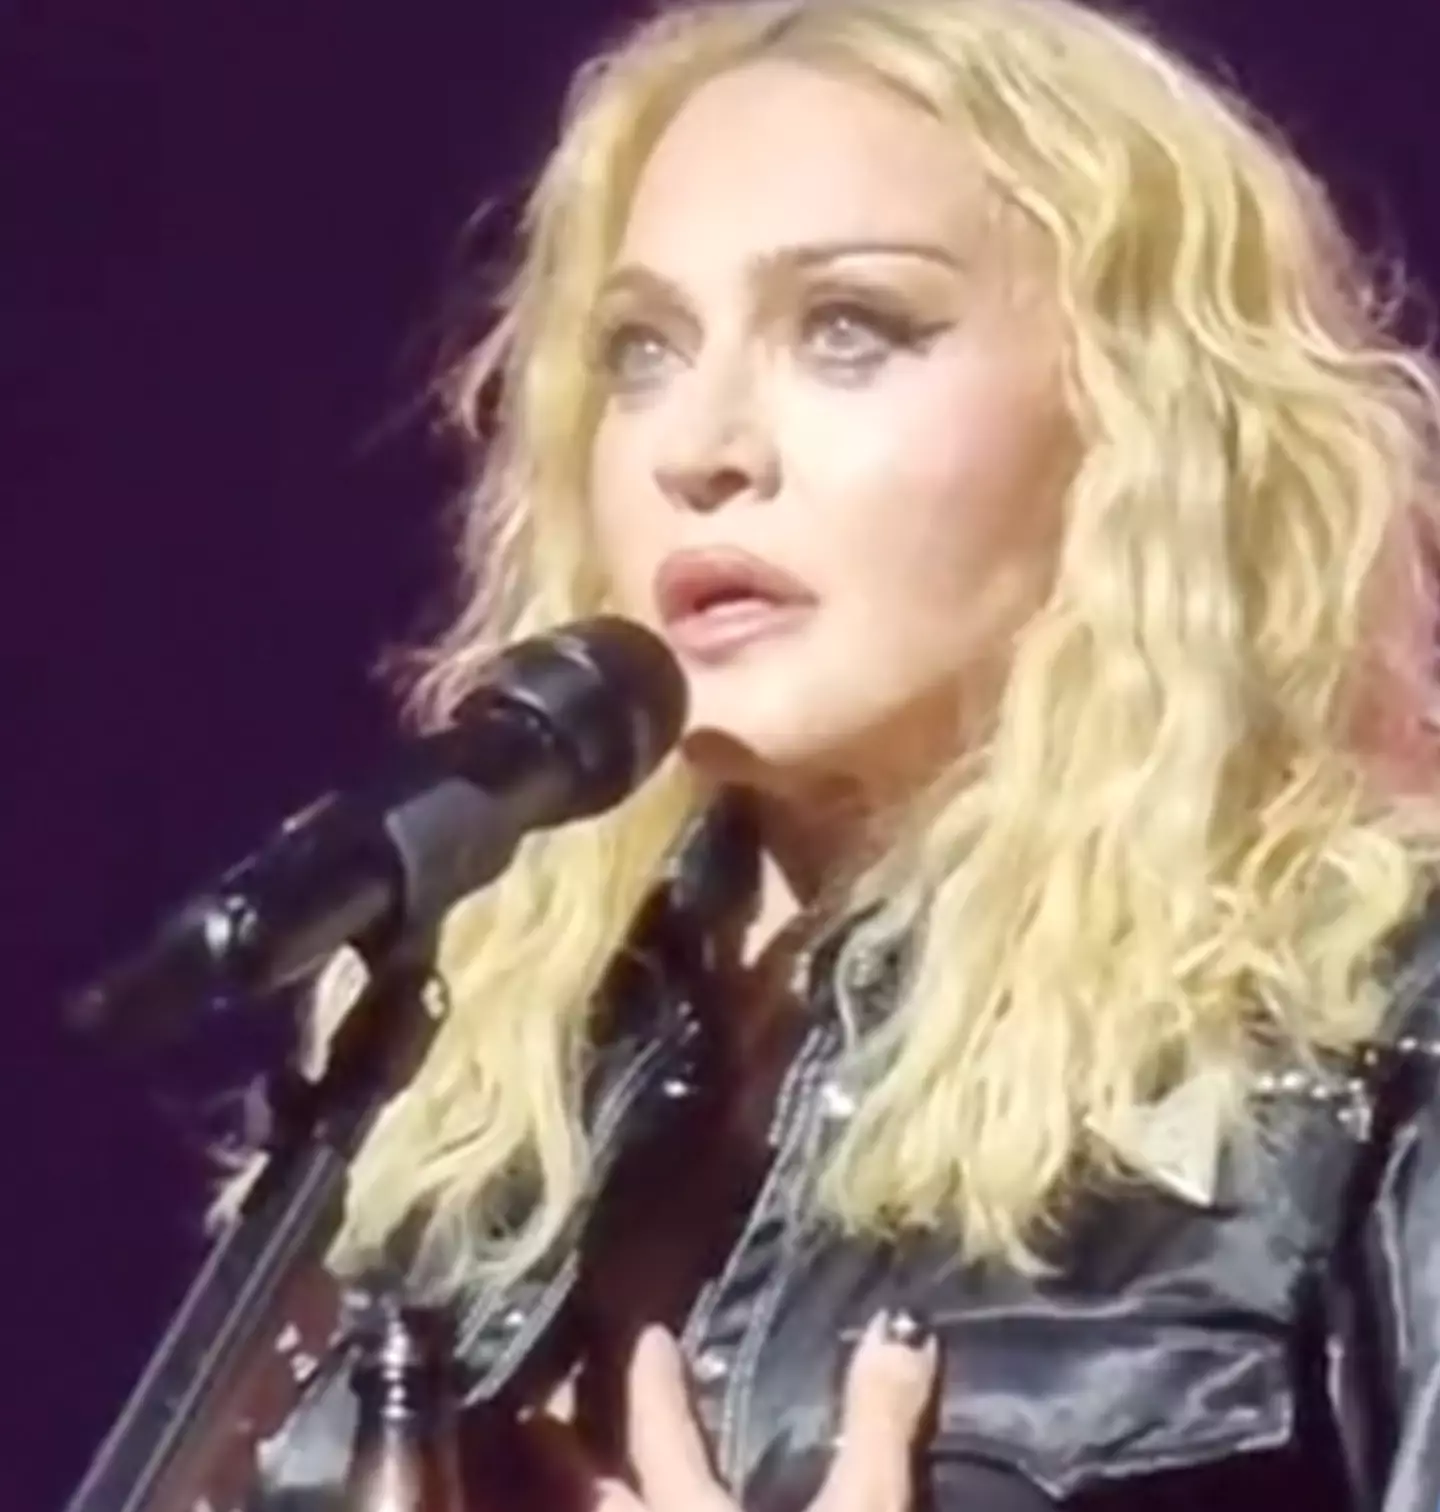 Madonna suffered a health scare earlier this year.